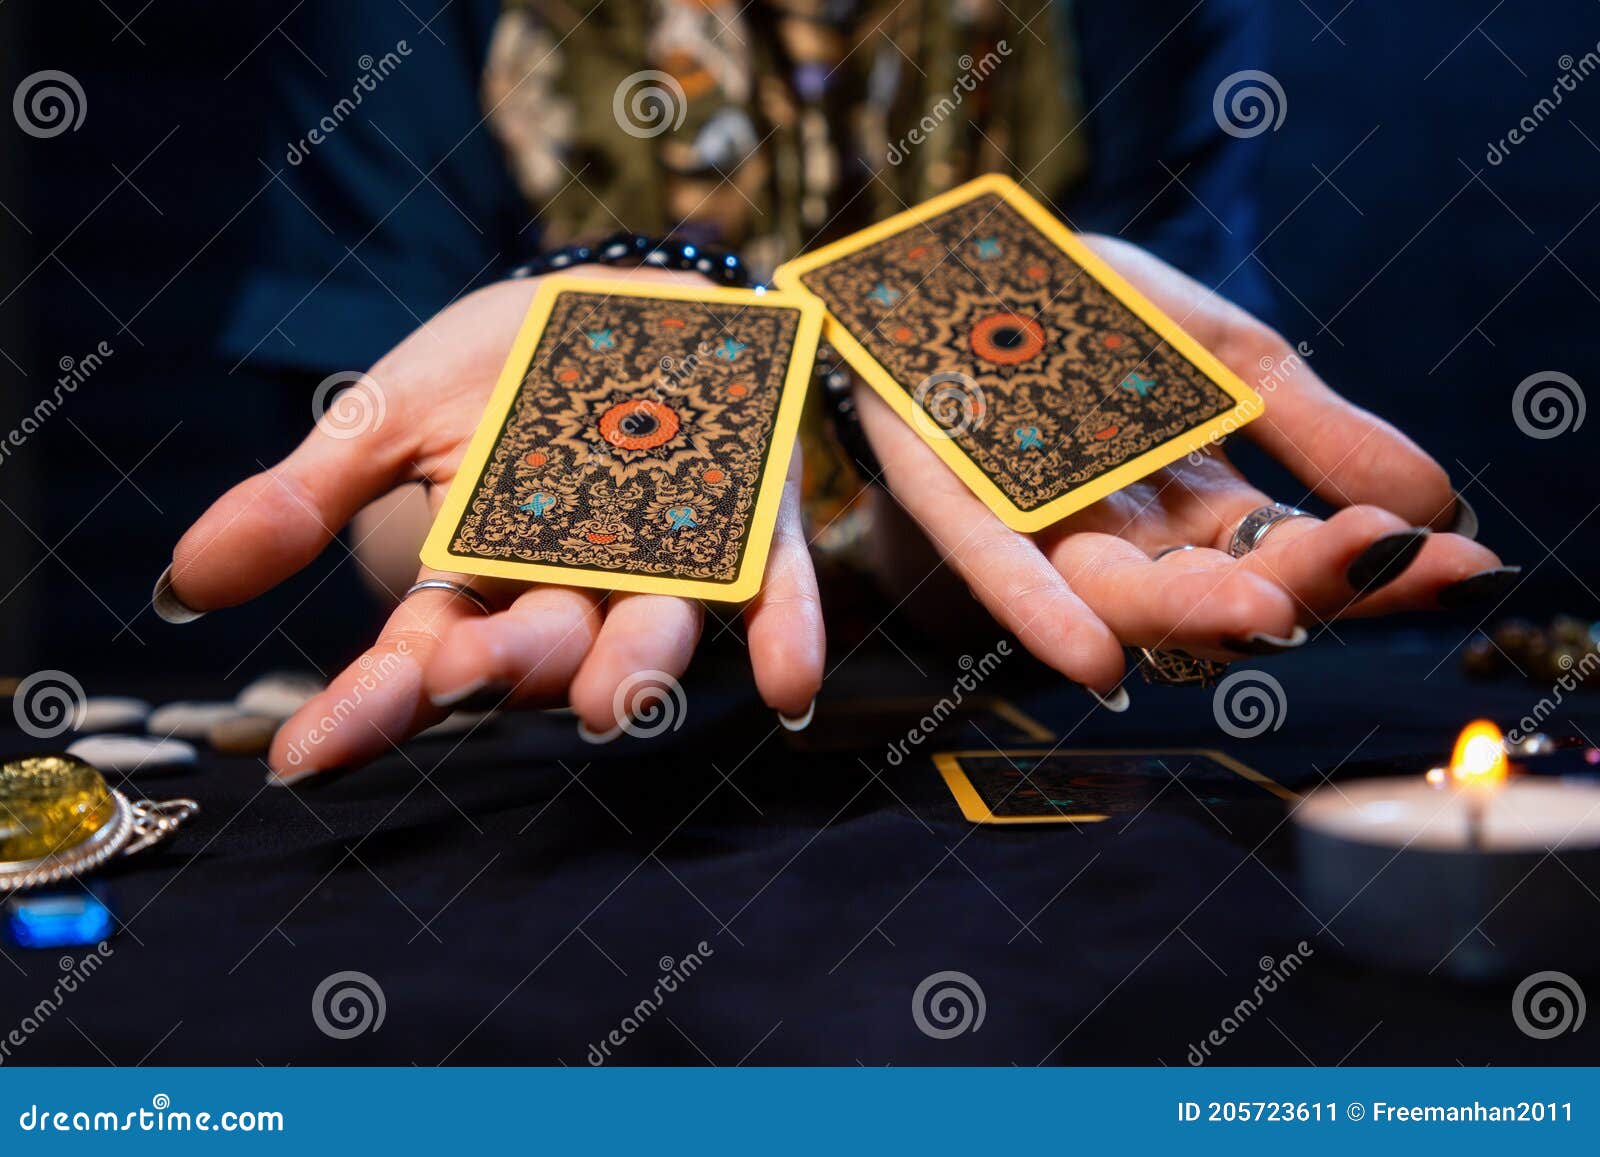 cartomancy. the fortune teller holds out two tarot cards on her palms. close up. the concept of divination, astrology and